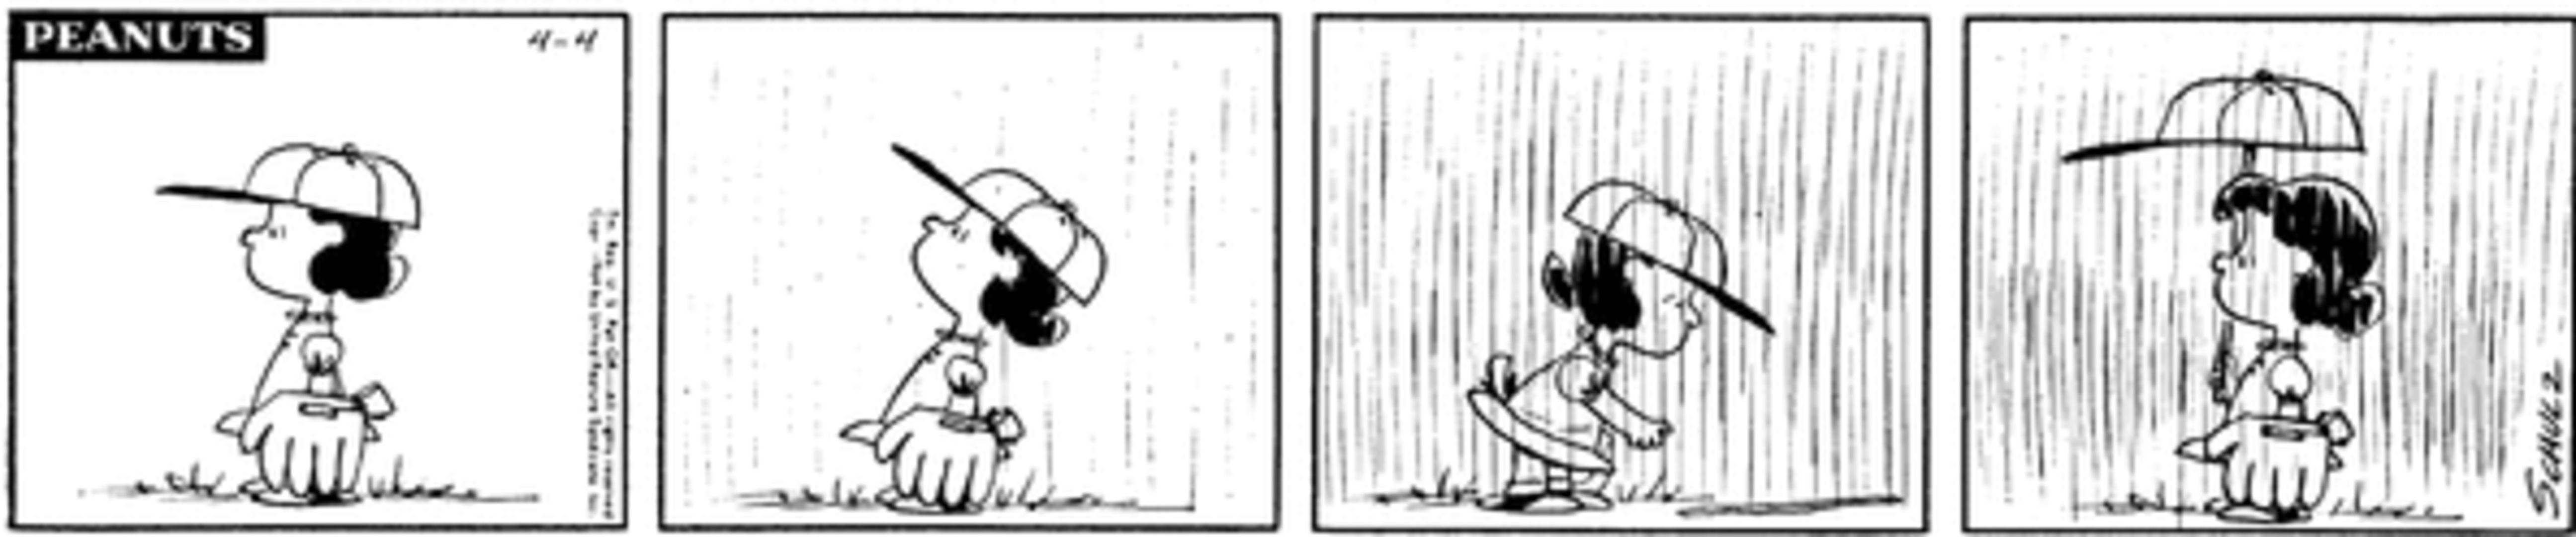 Lucy with rain in Peanuts.